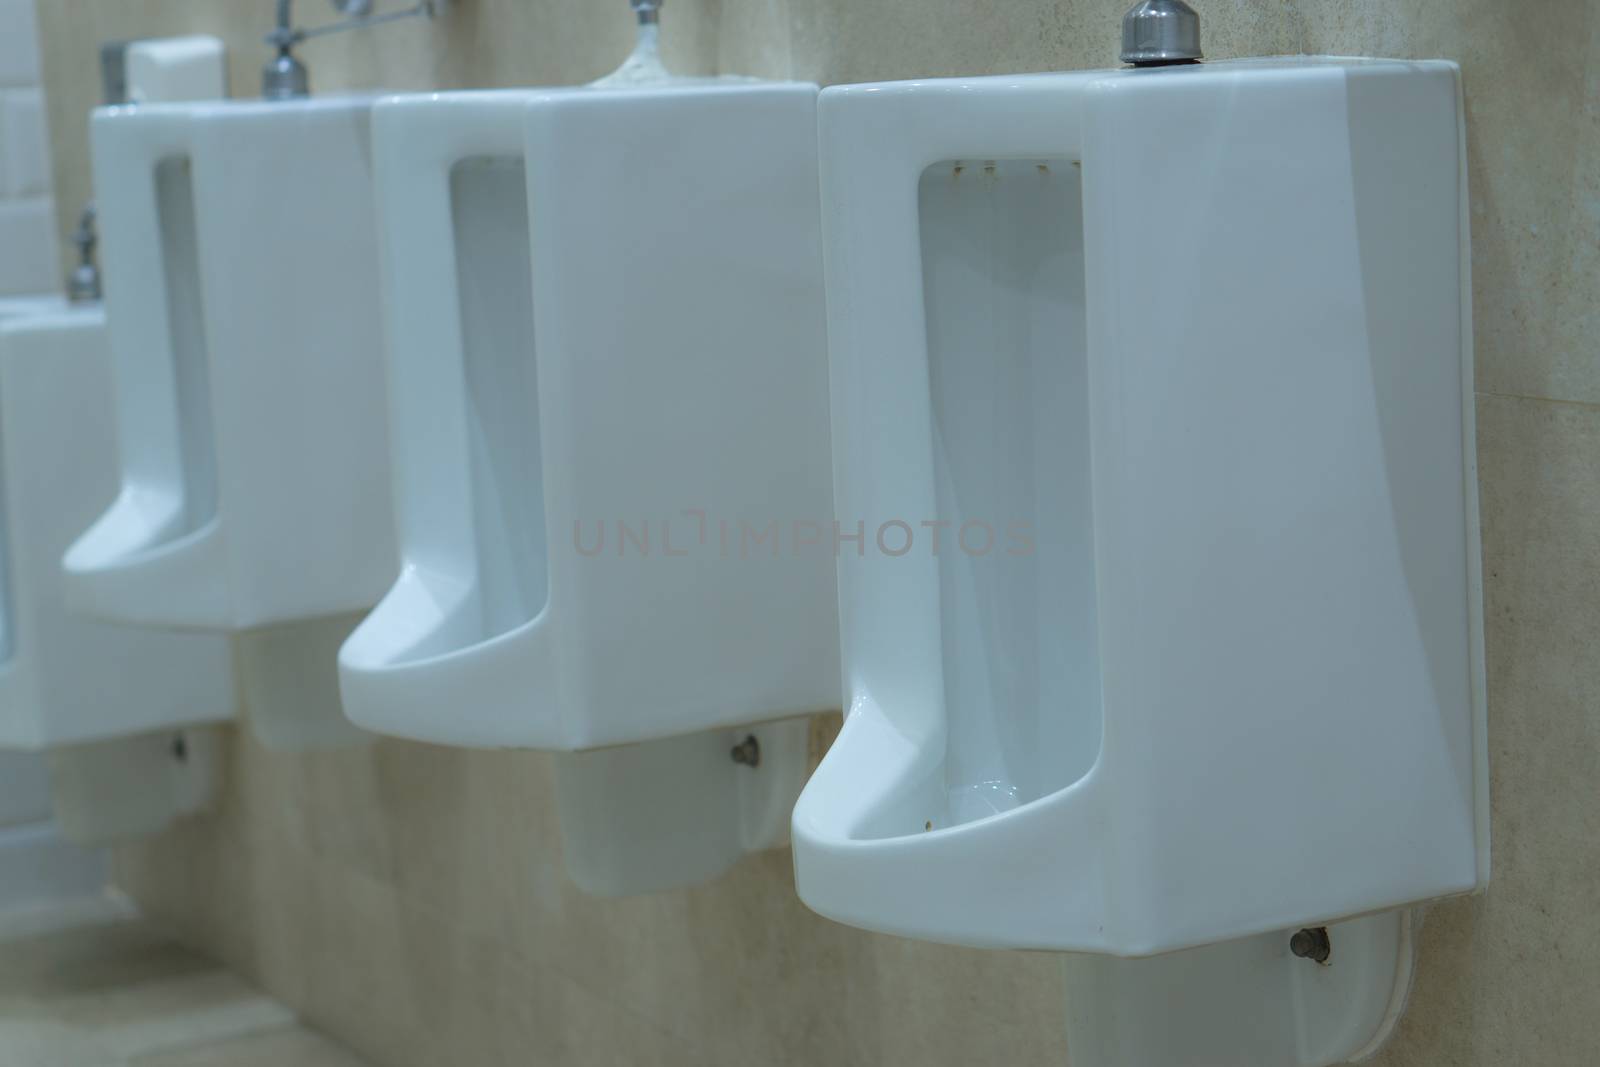 Men's room with white porcelain urinals in line. Comfort male toilet urinal concept.